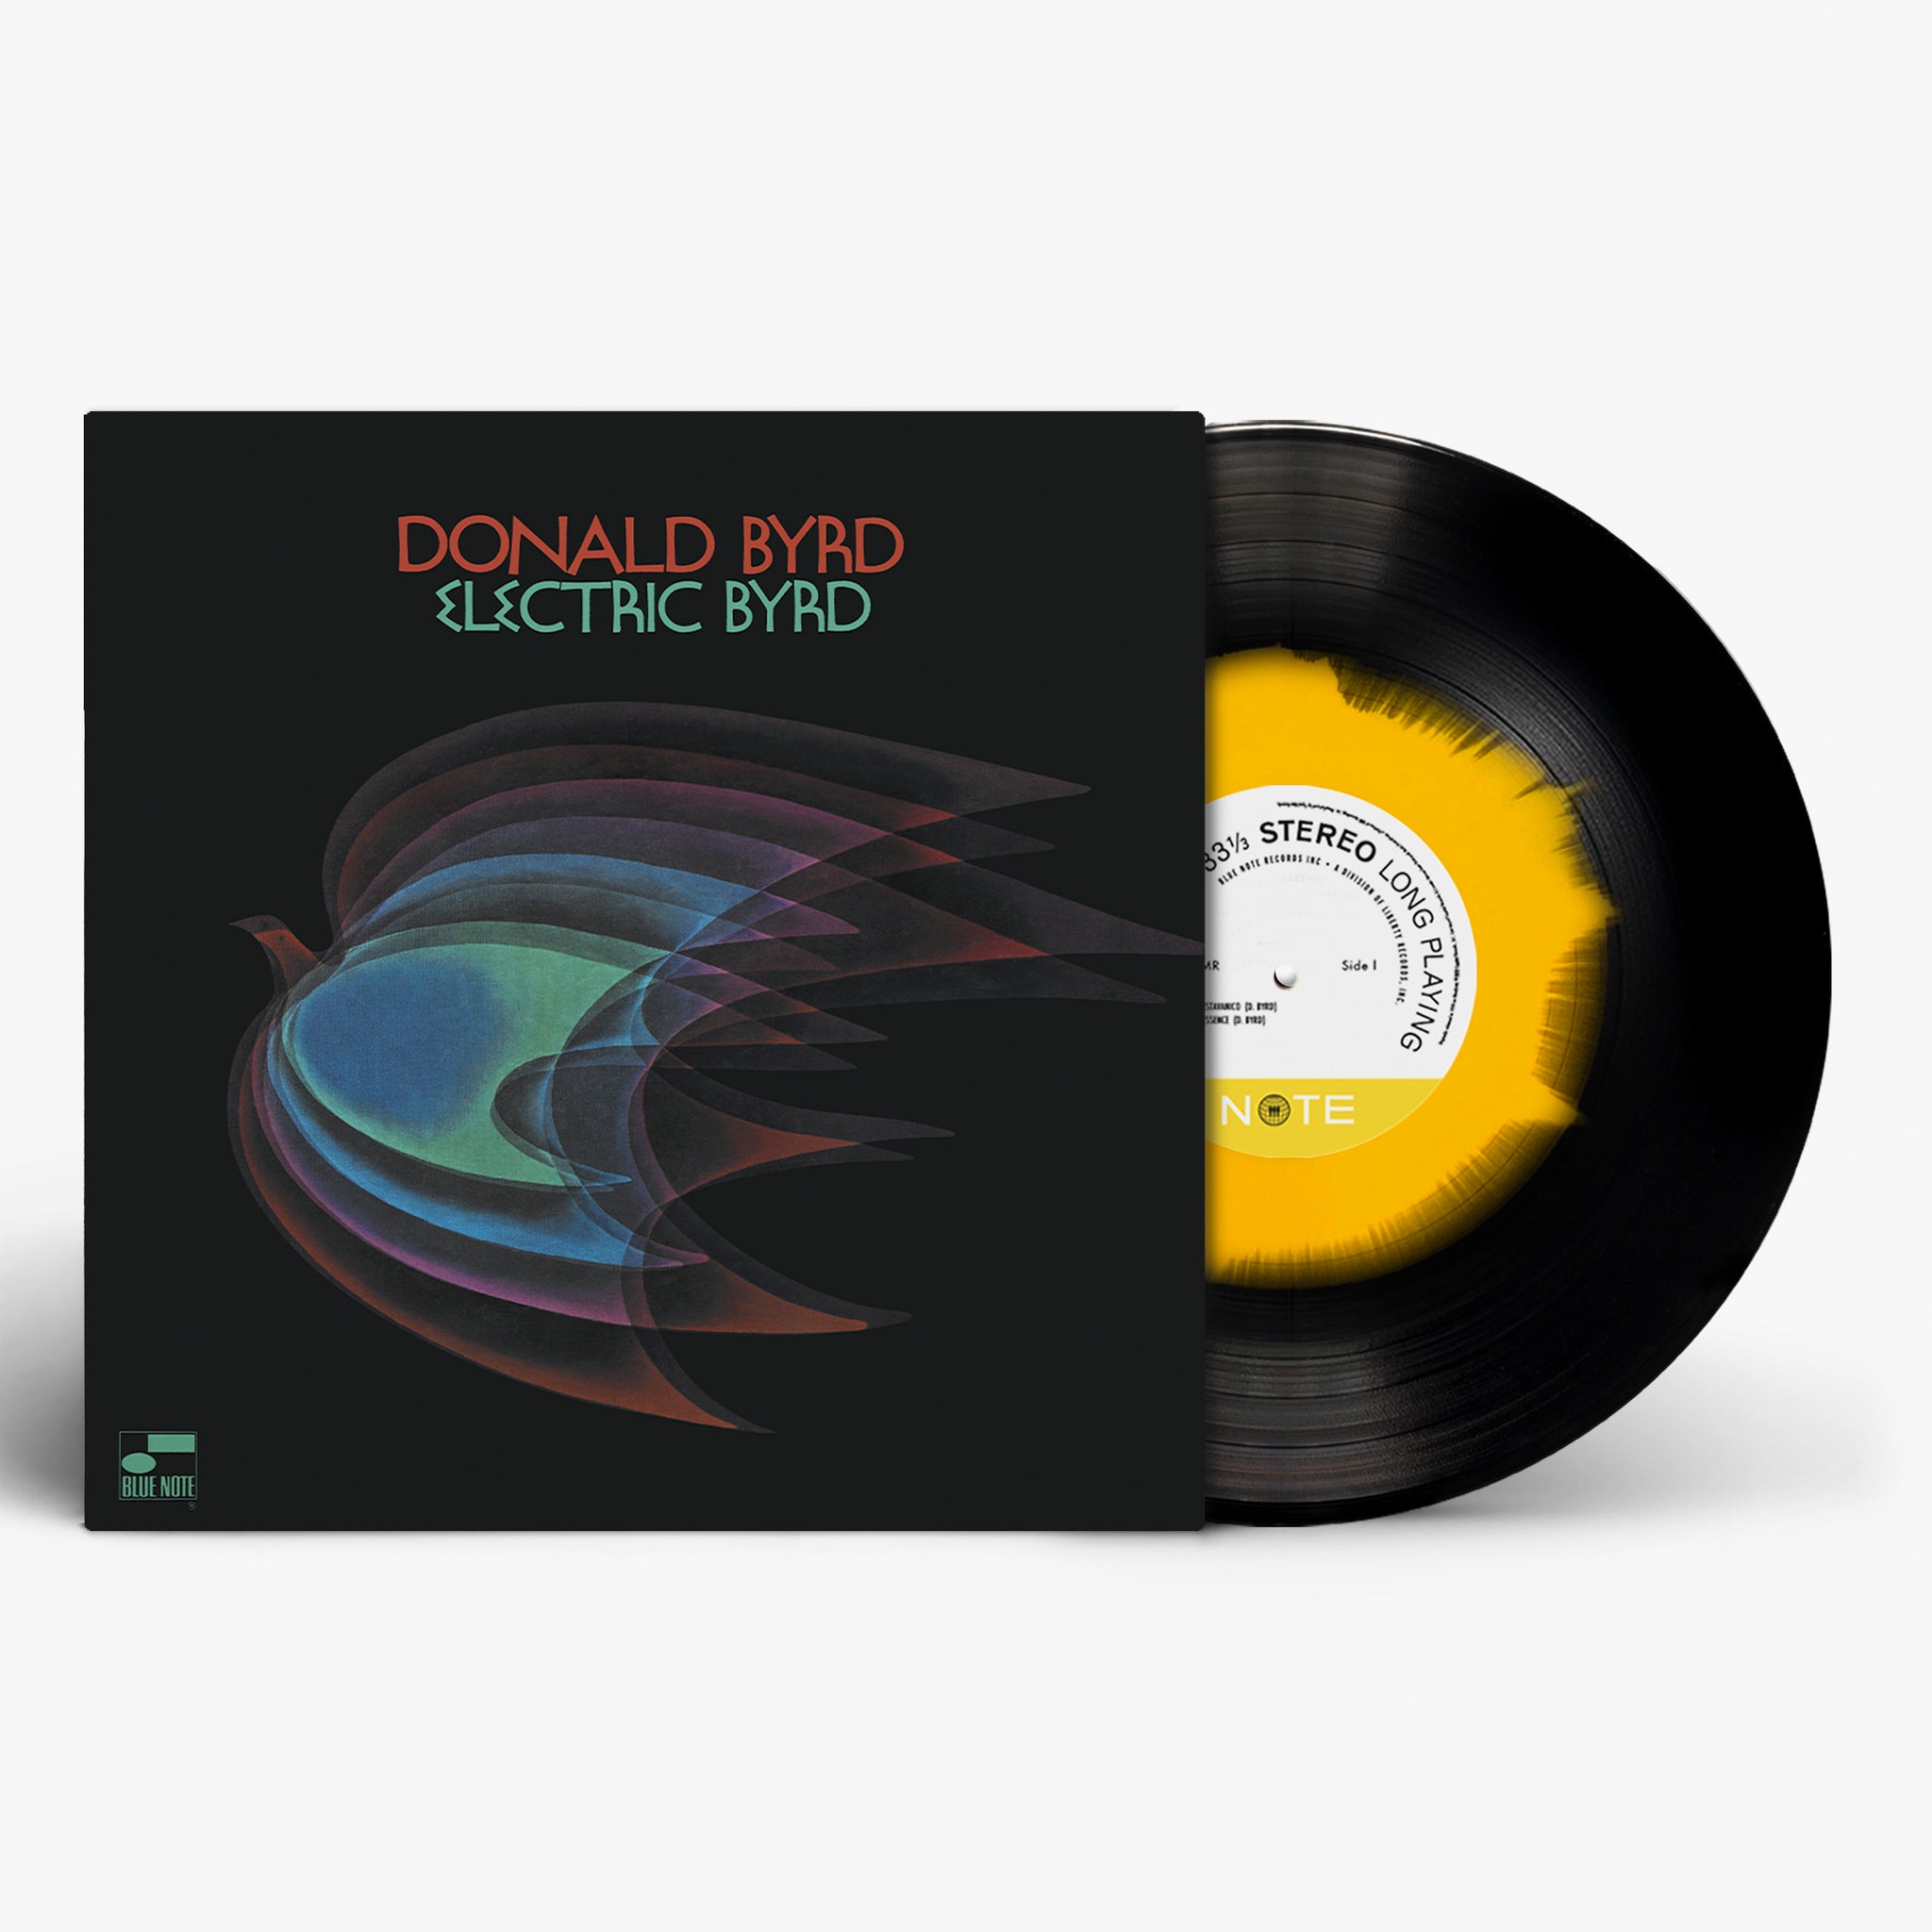 Electric Byrd (Limited Edition 313 Eclipse Vinyl)